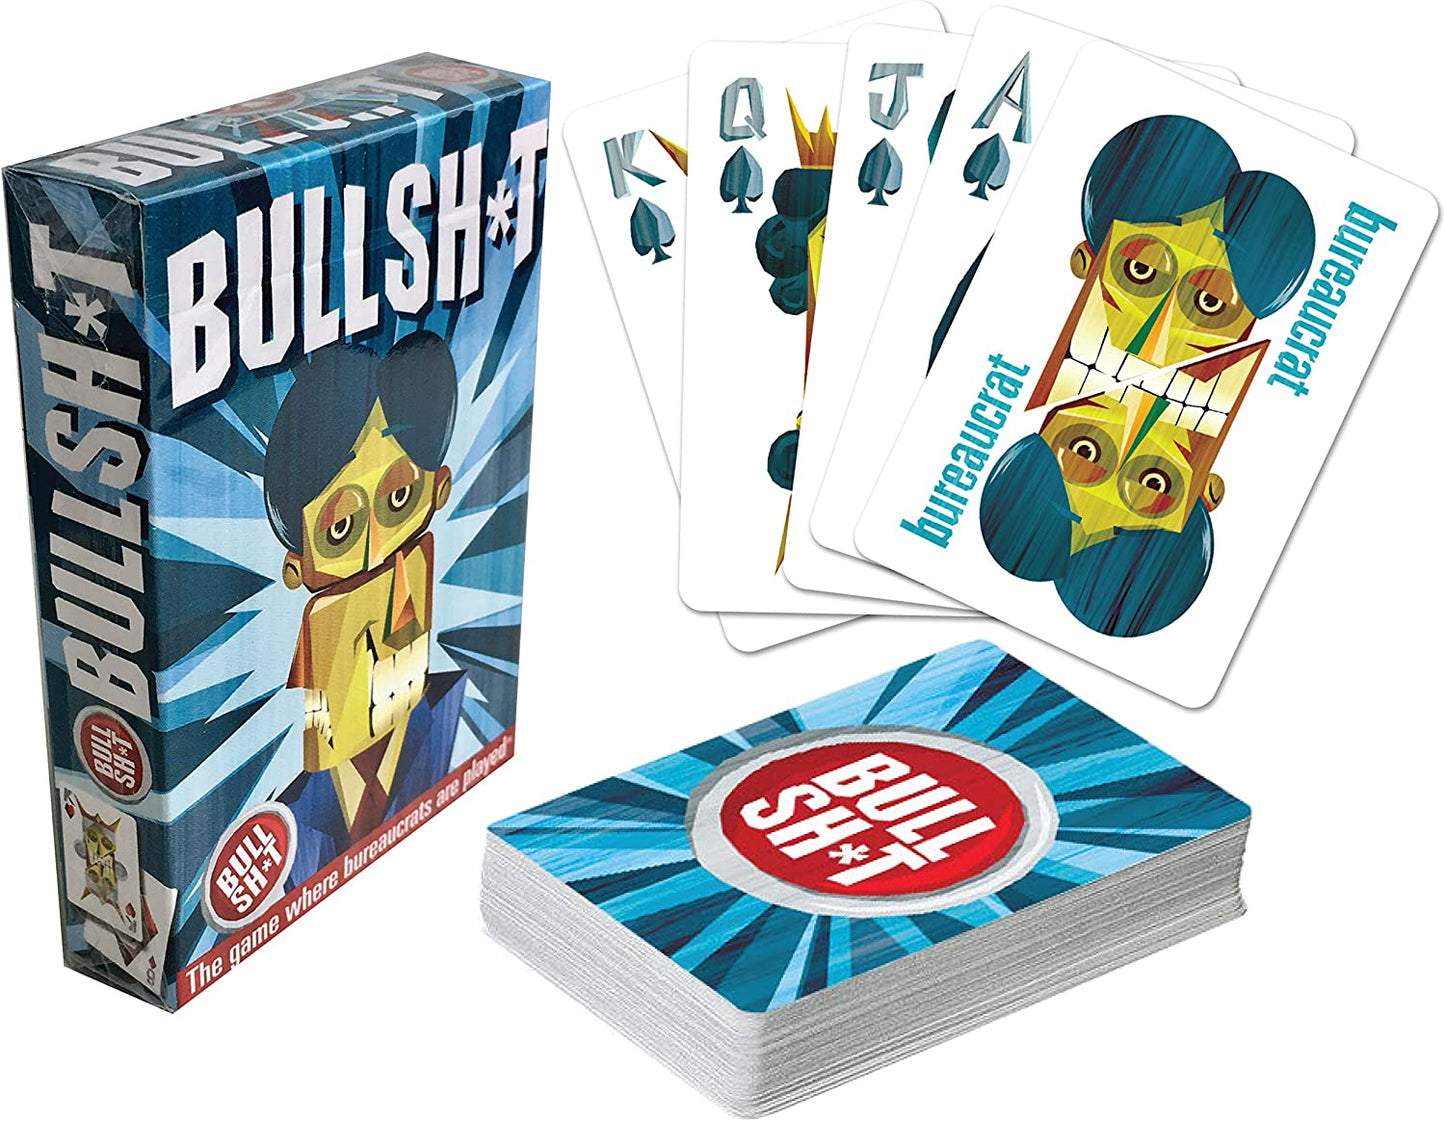 The BS Button Game Expansion Pack: Double the Fun, Double the BS!